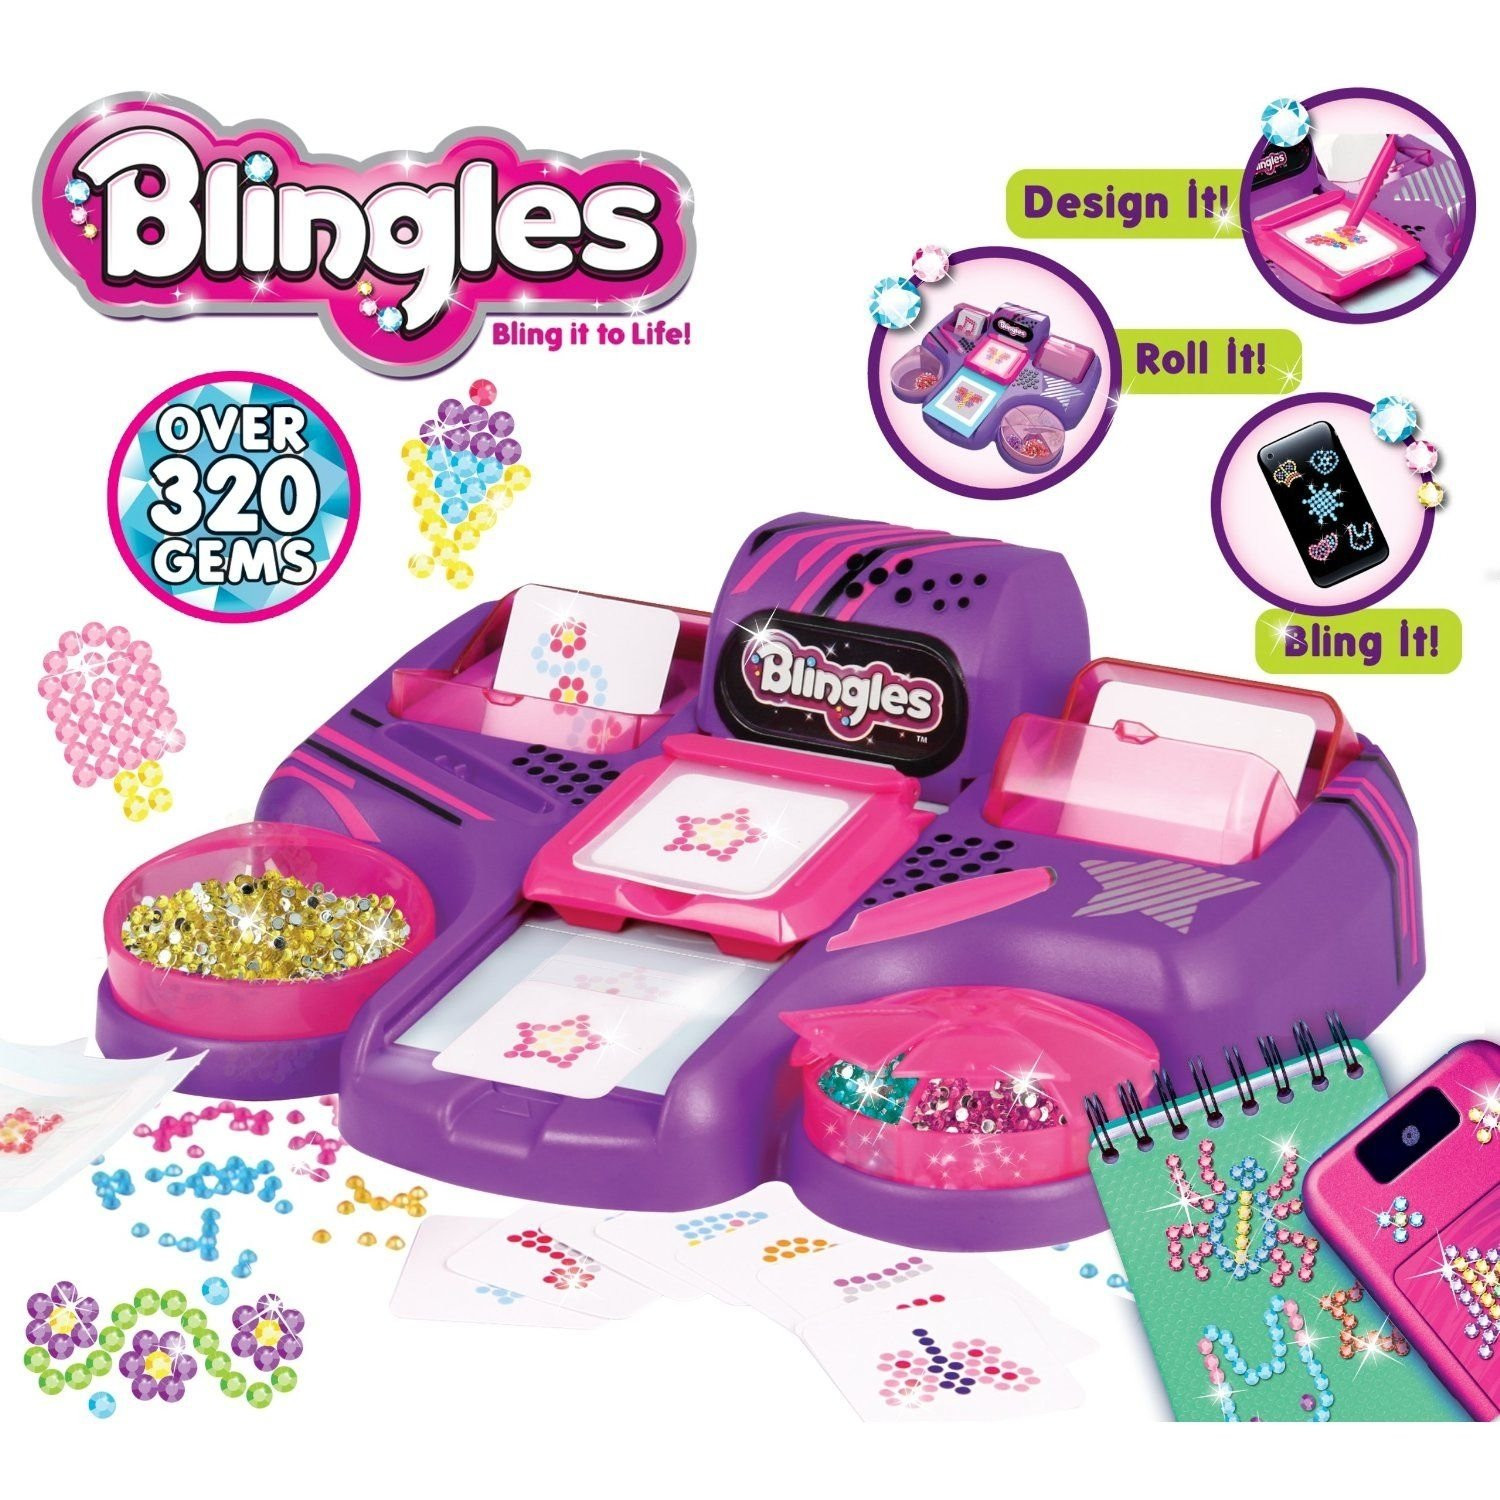 Girls Gift Ideas Age 11
 10 Lovable Gift Ideas For Girls Age 9 2021